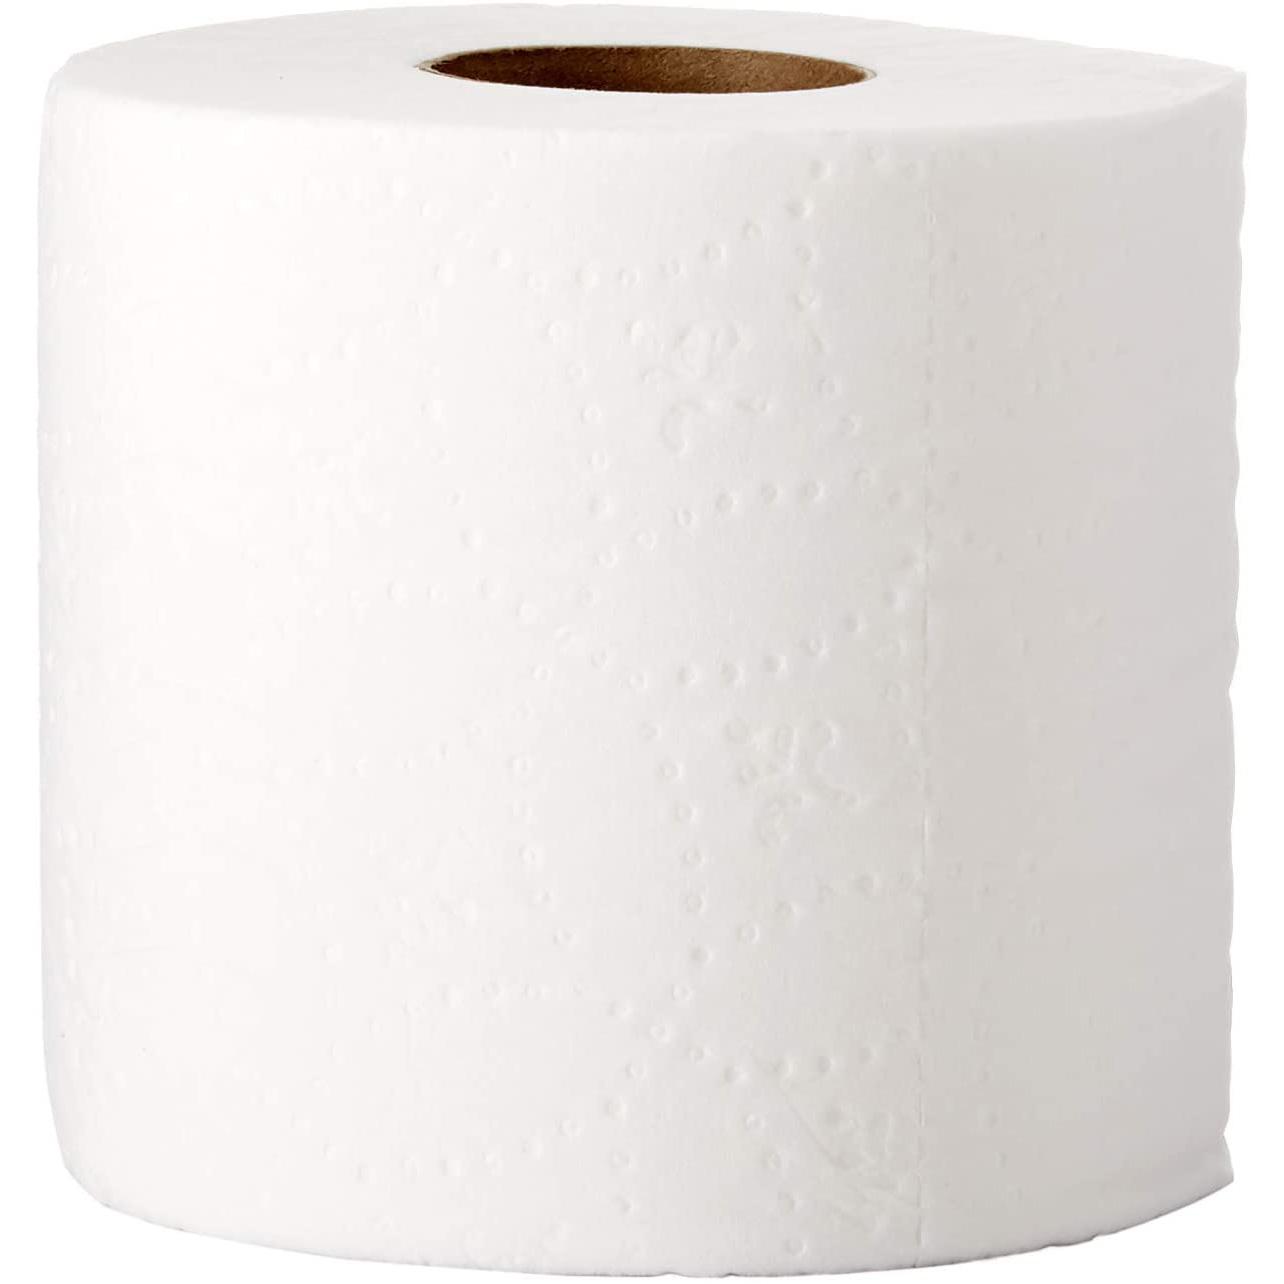 80 AmazonCommercial Ultra Plus Toilet Papers for $37.05 Shipped